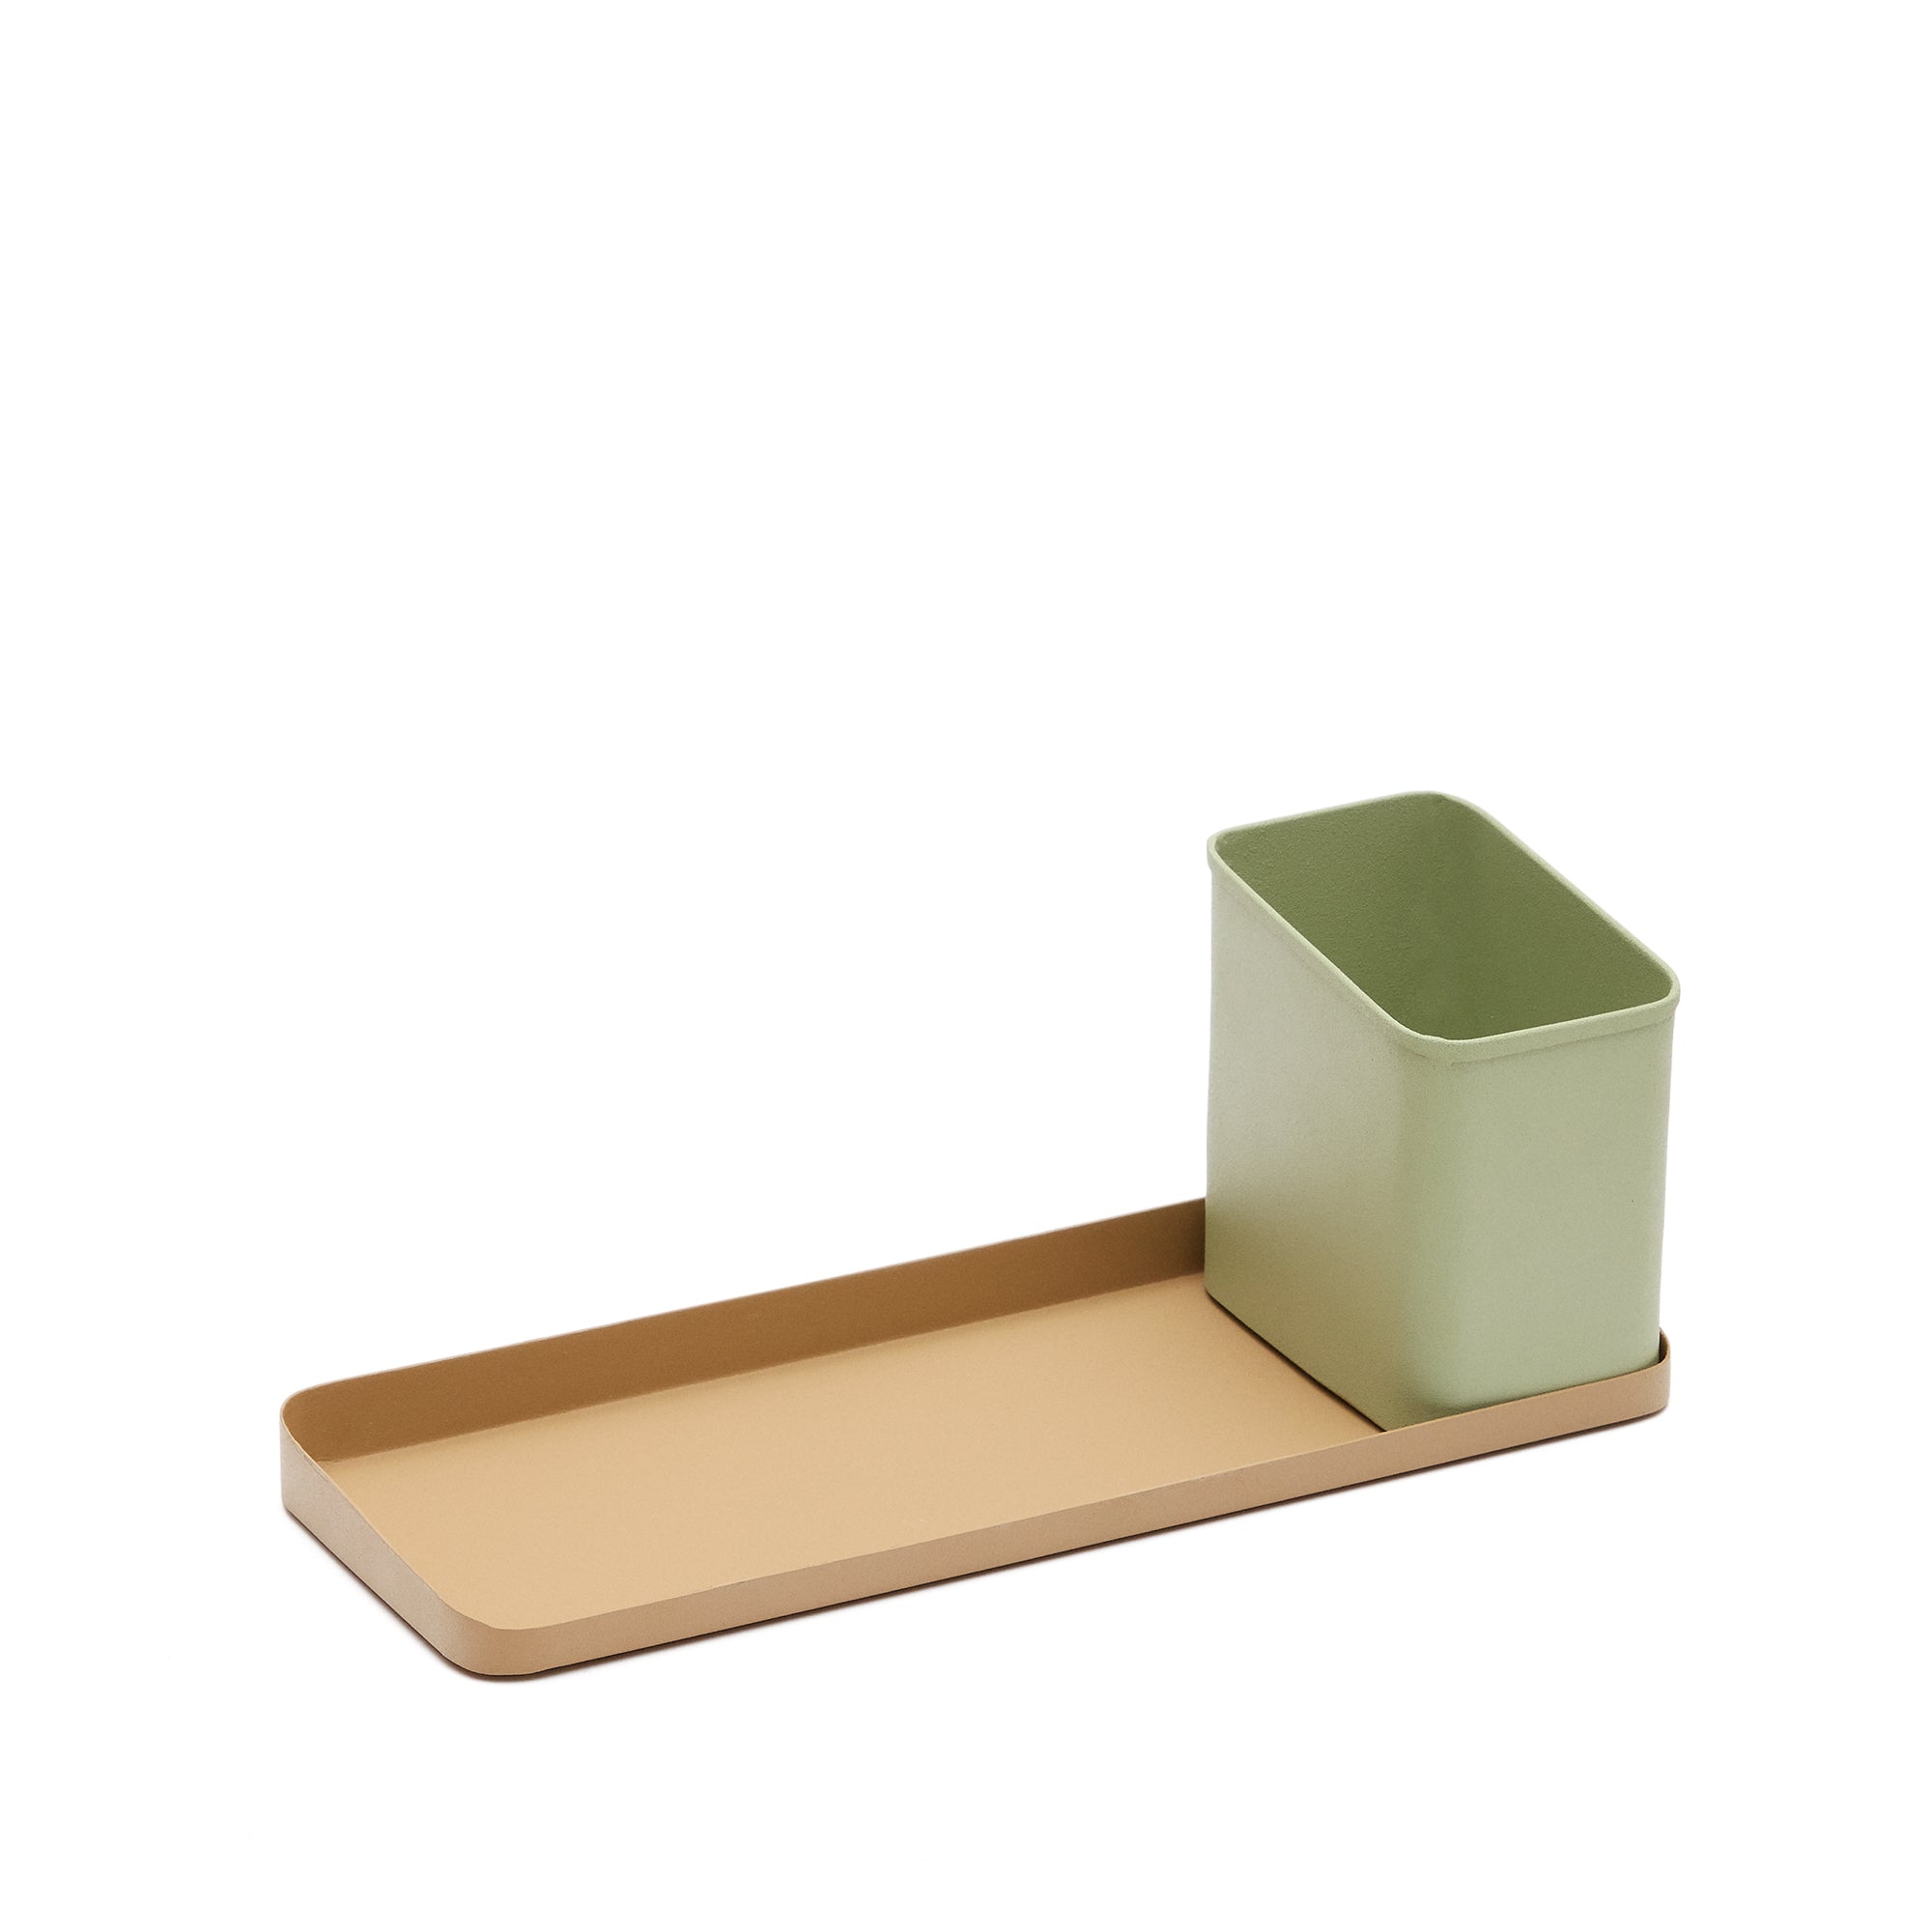 Moka pencil and desk tray set in green and brown metal